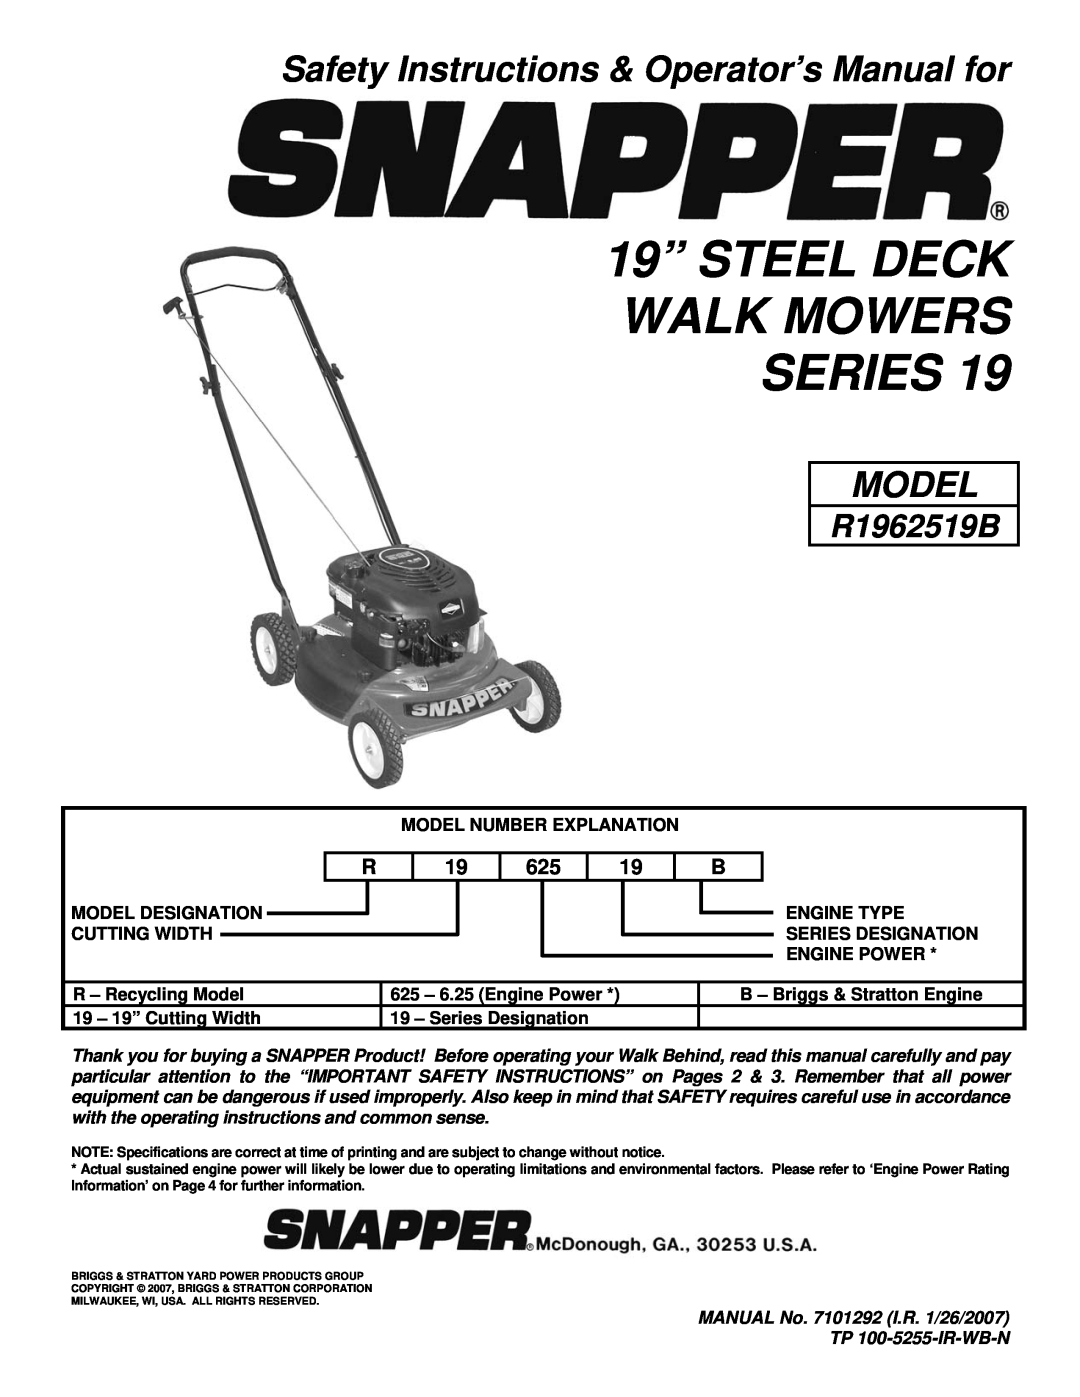 Snapper R1962519B important safety instructions Safety Instructions & Operator’s Manual for, Model 